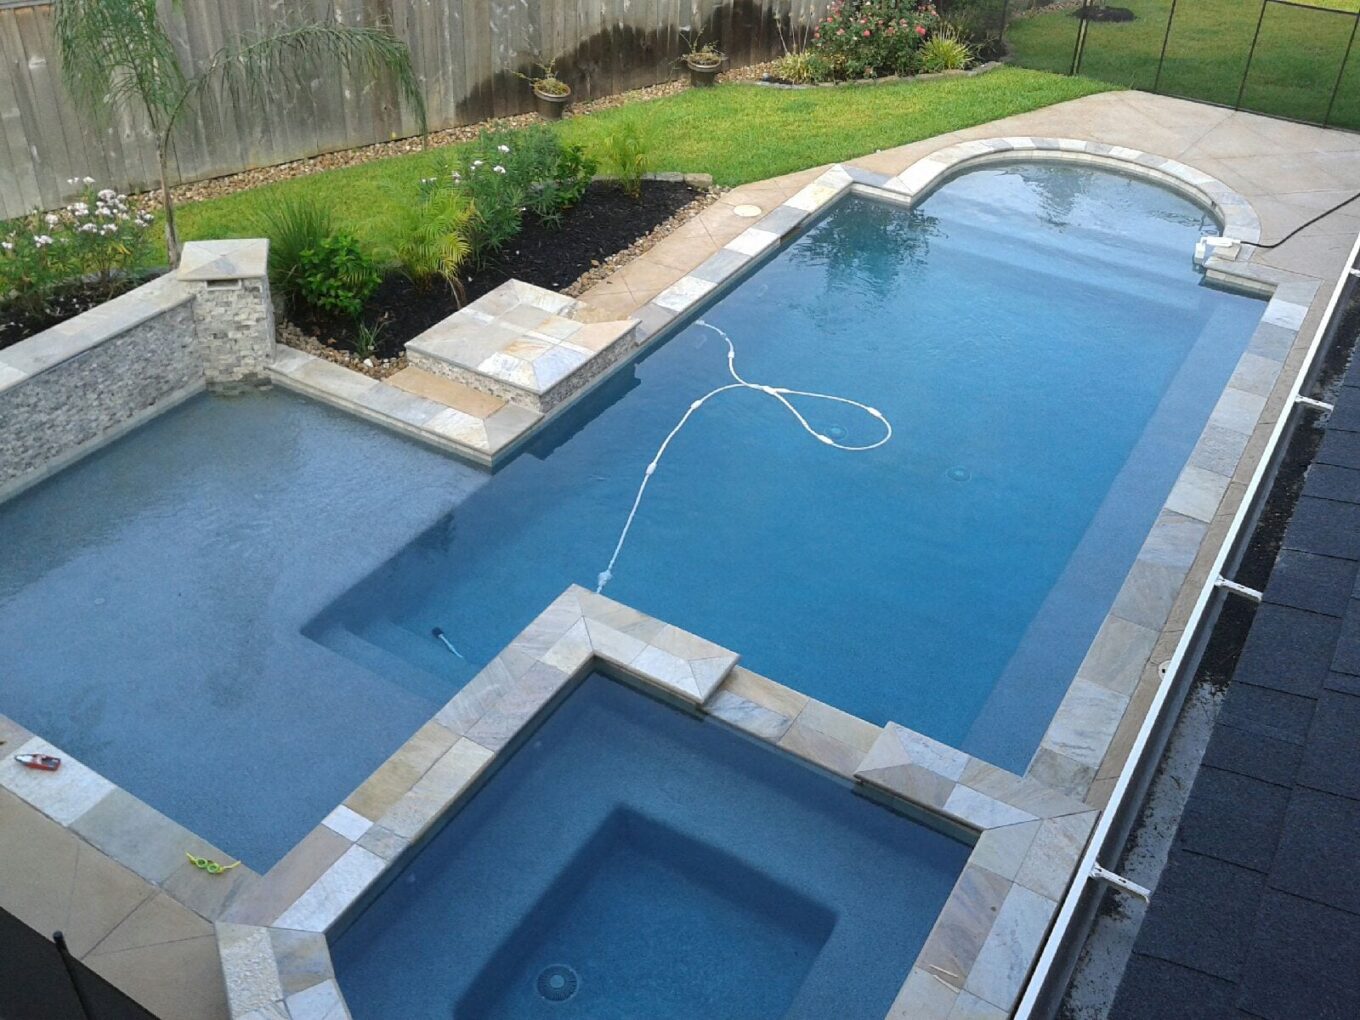 A pool with a hot tub and a diving board.